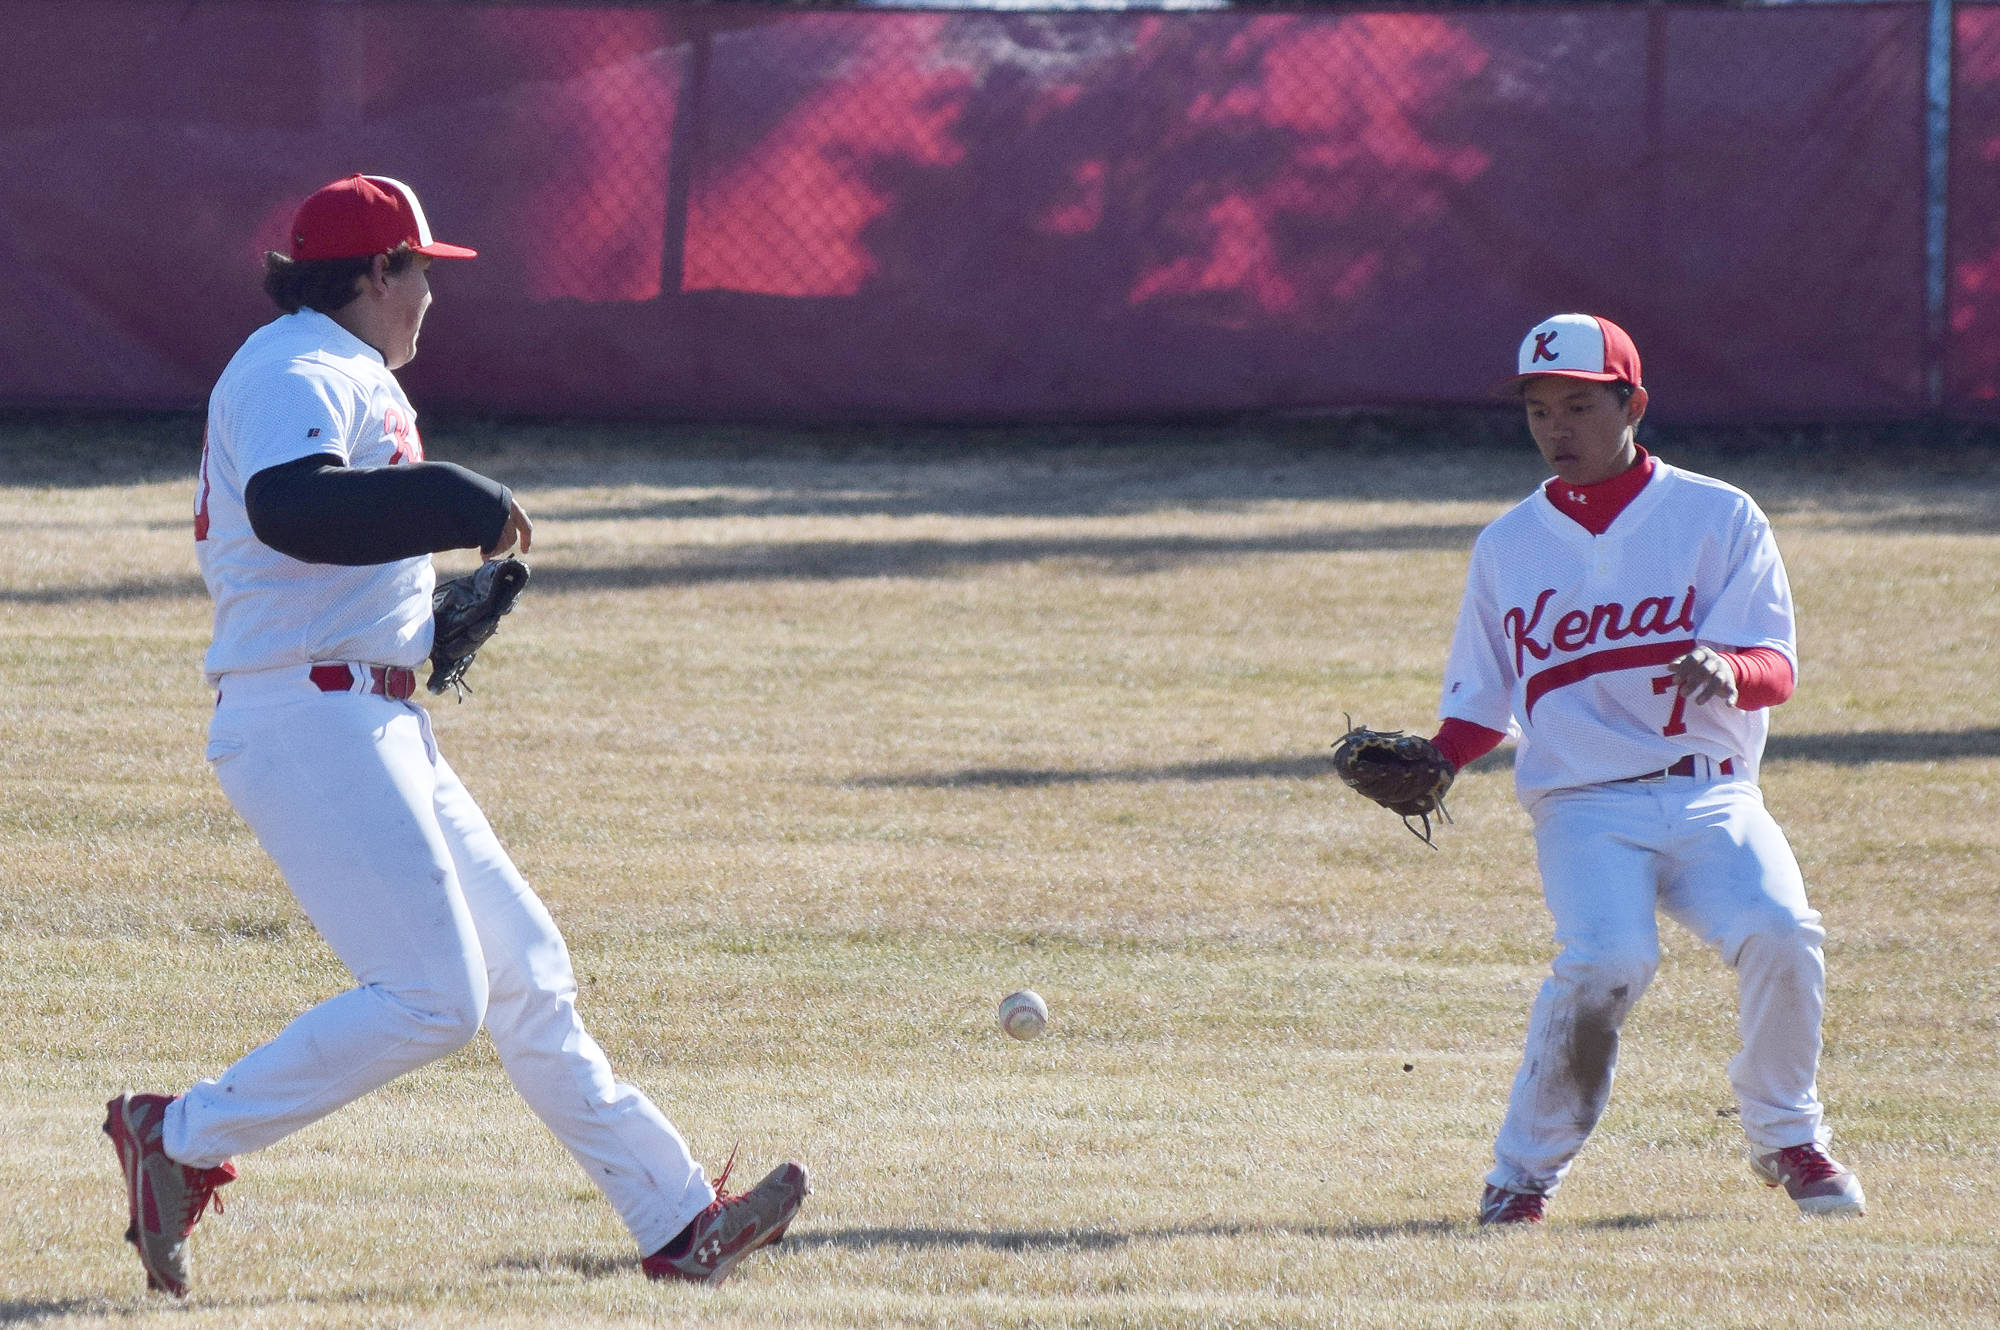 Kenai Central outfielders Manny Noriega and Harold Ochea (7) converge on a bloop single from a Kodiak batter Friday at the Kenai Little League Fields. (Photo by Joey Klecka/Peninsula Clarion)